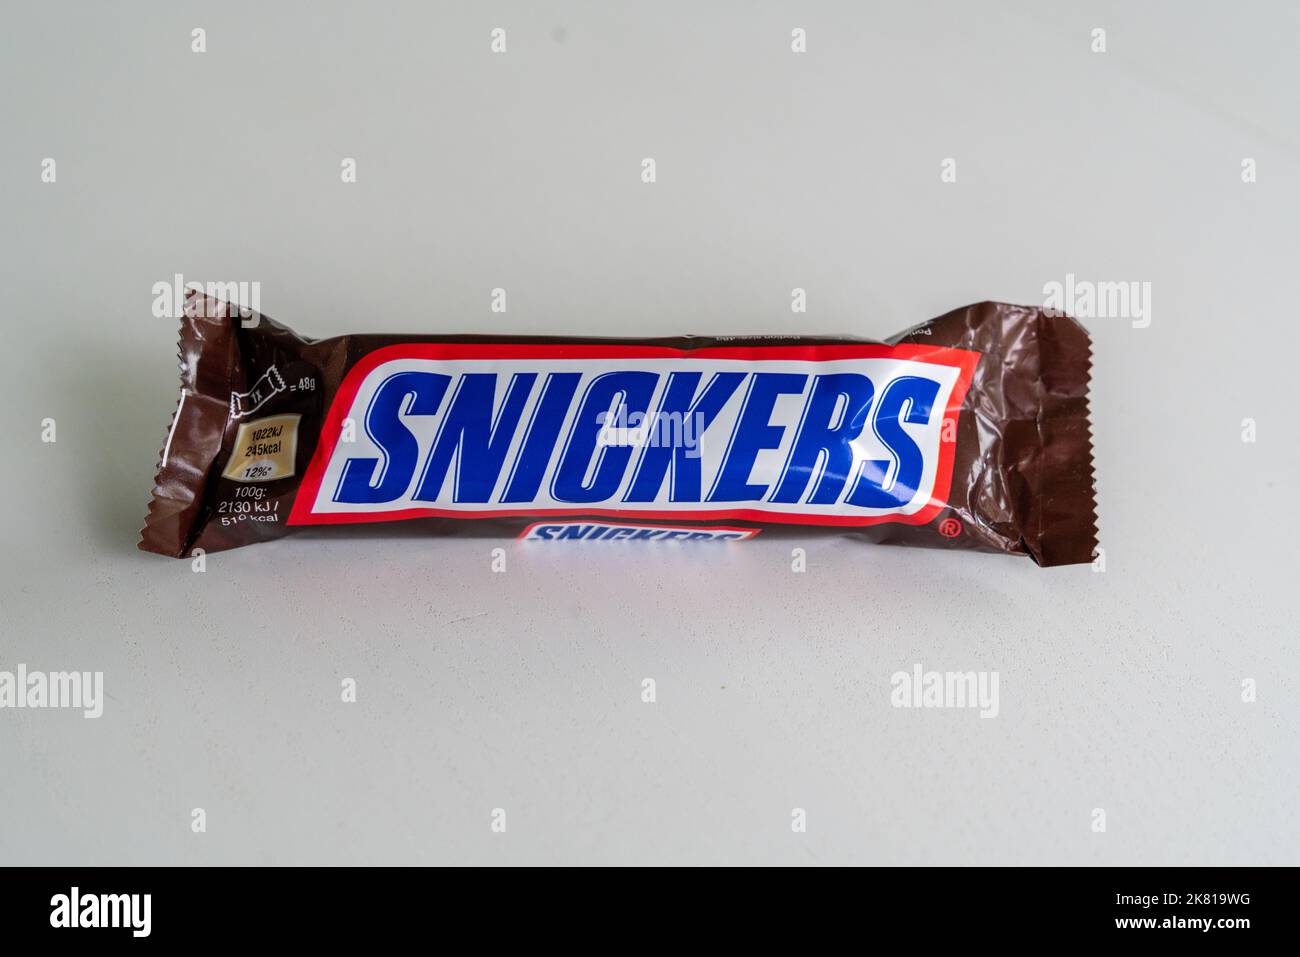 An Unopened Single Snickers - formerly Marathon - Bar pictured on plain background Stock Photo